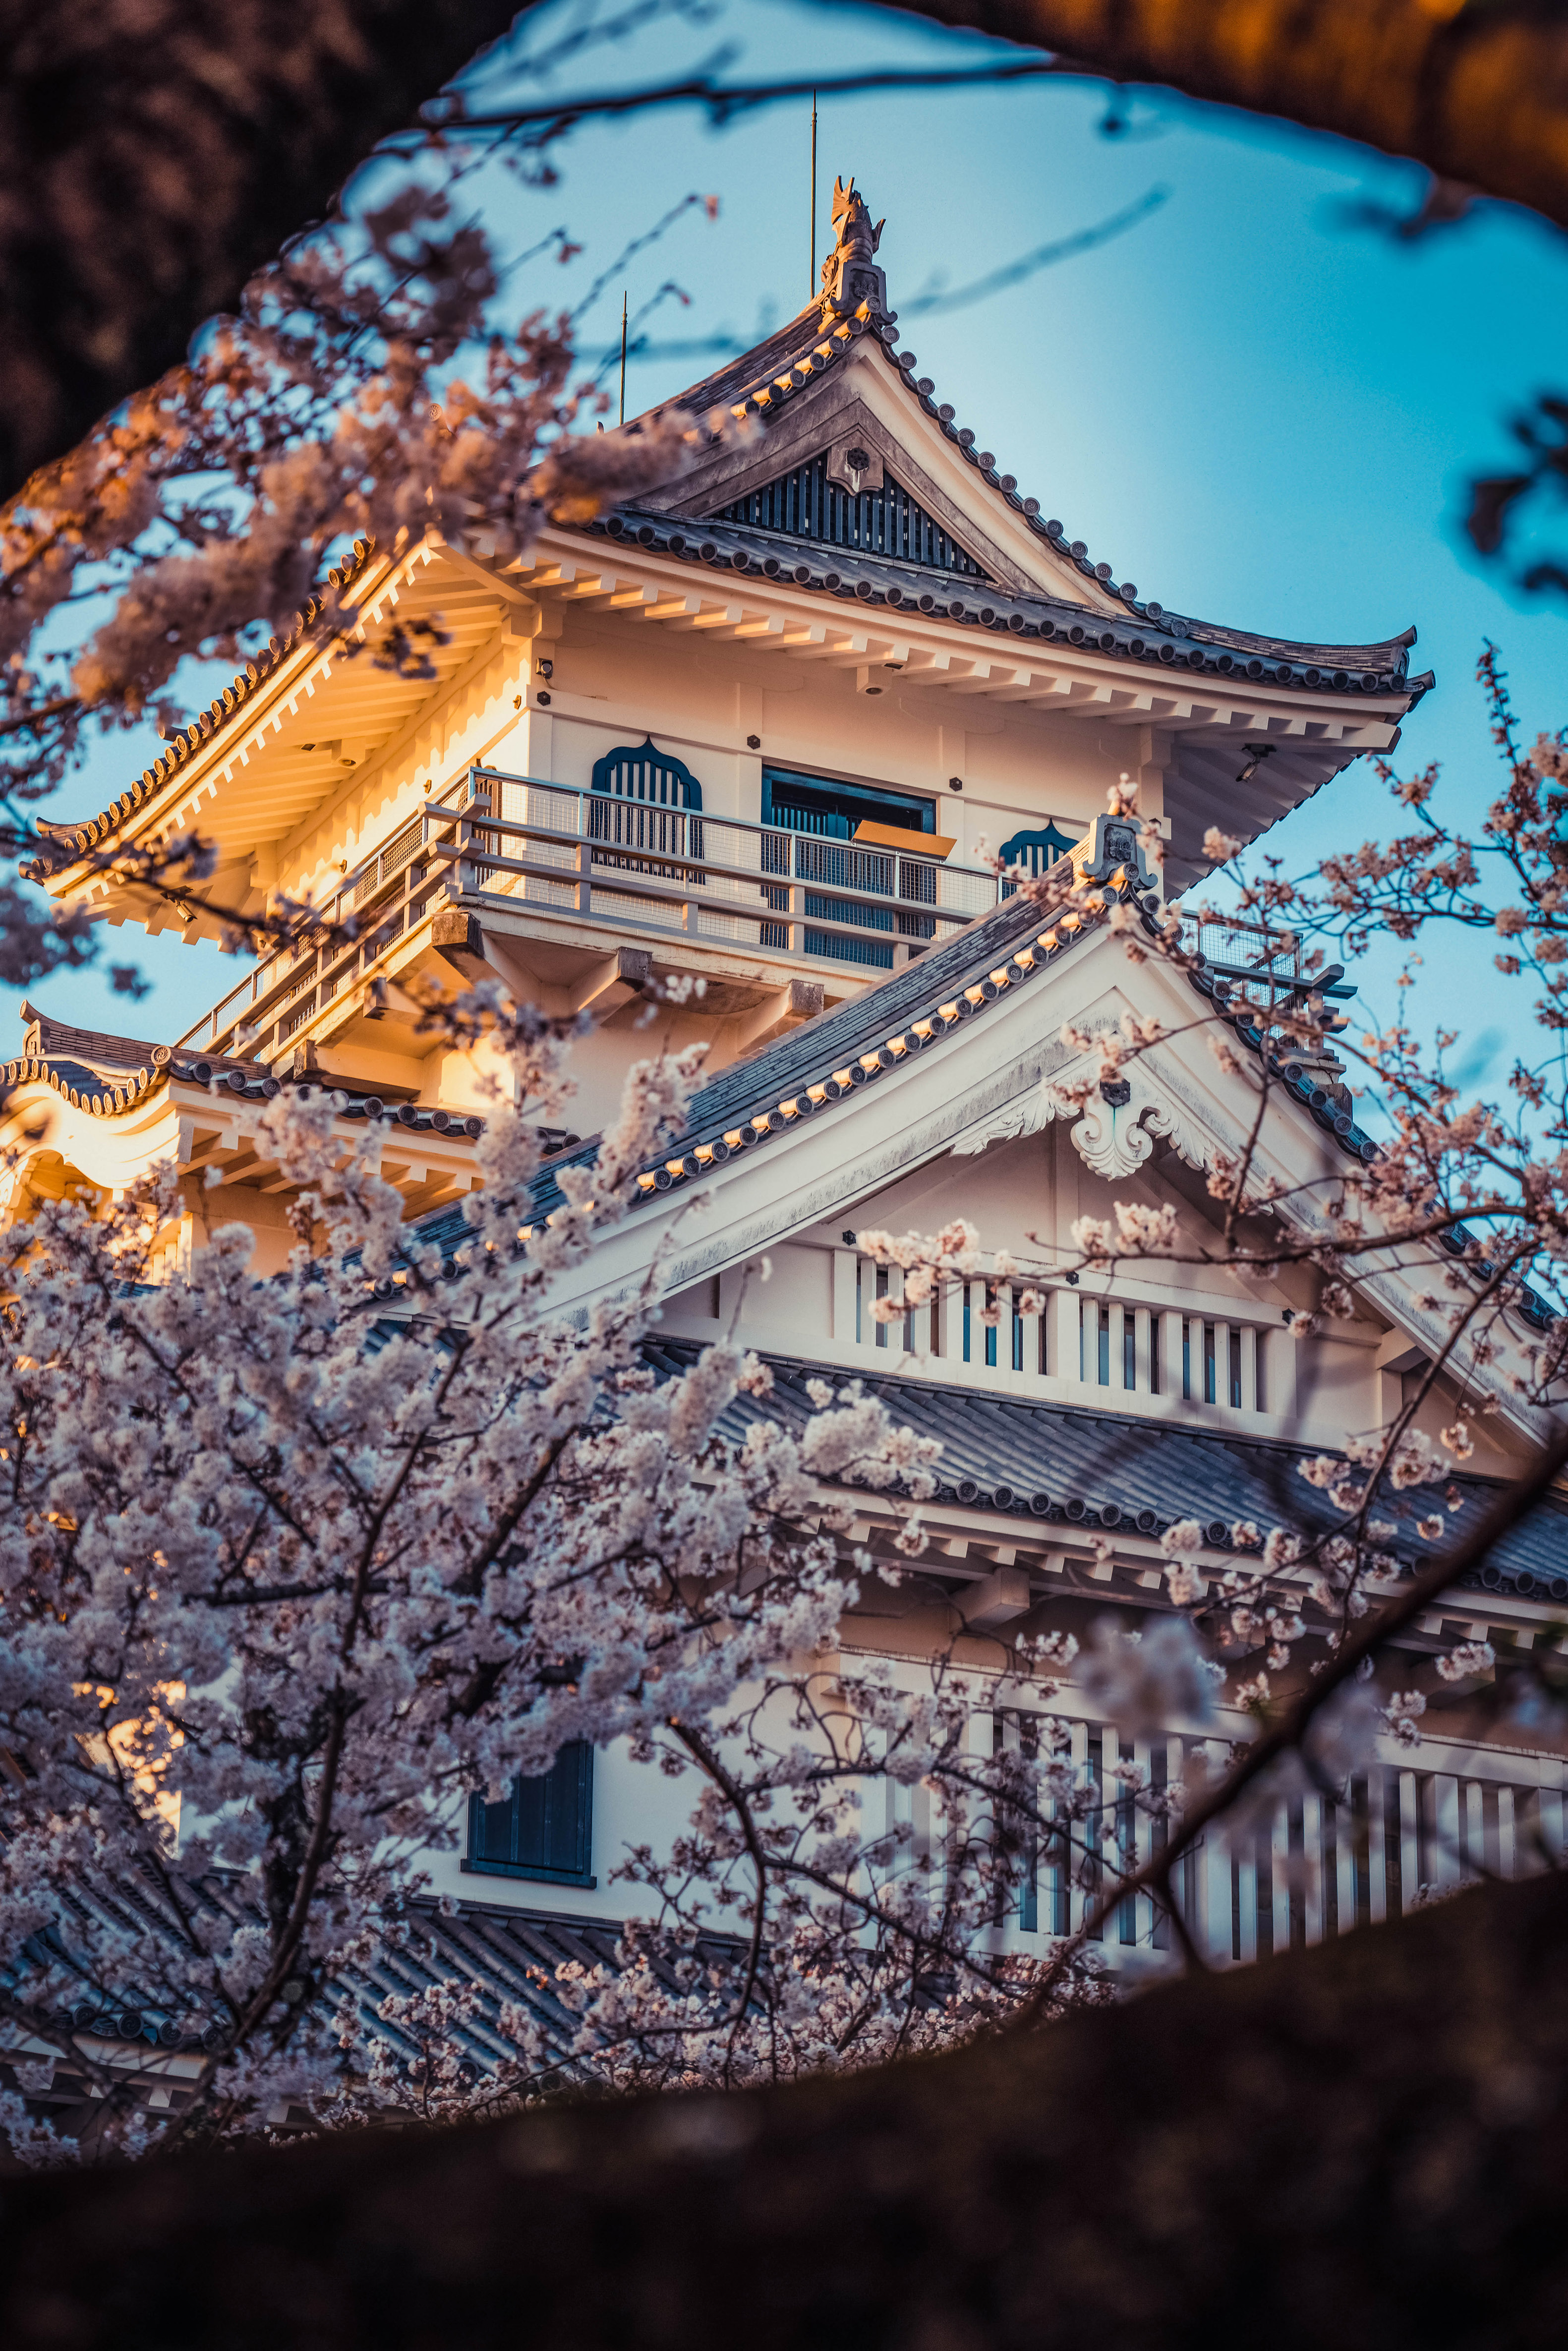 General 3163x4742 Japan tower portrait display building flowers architecture cherry blossom cherry trees photography